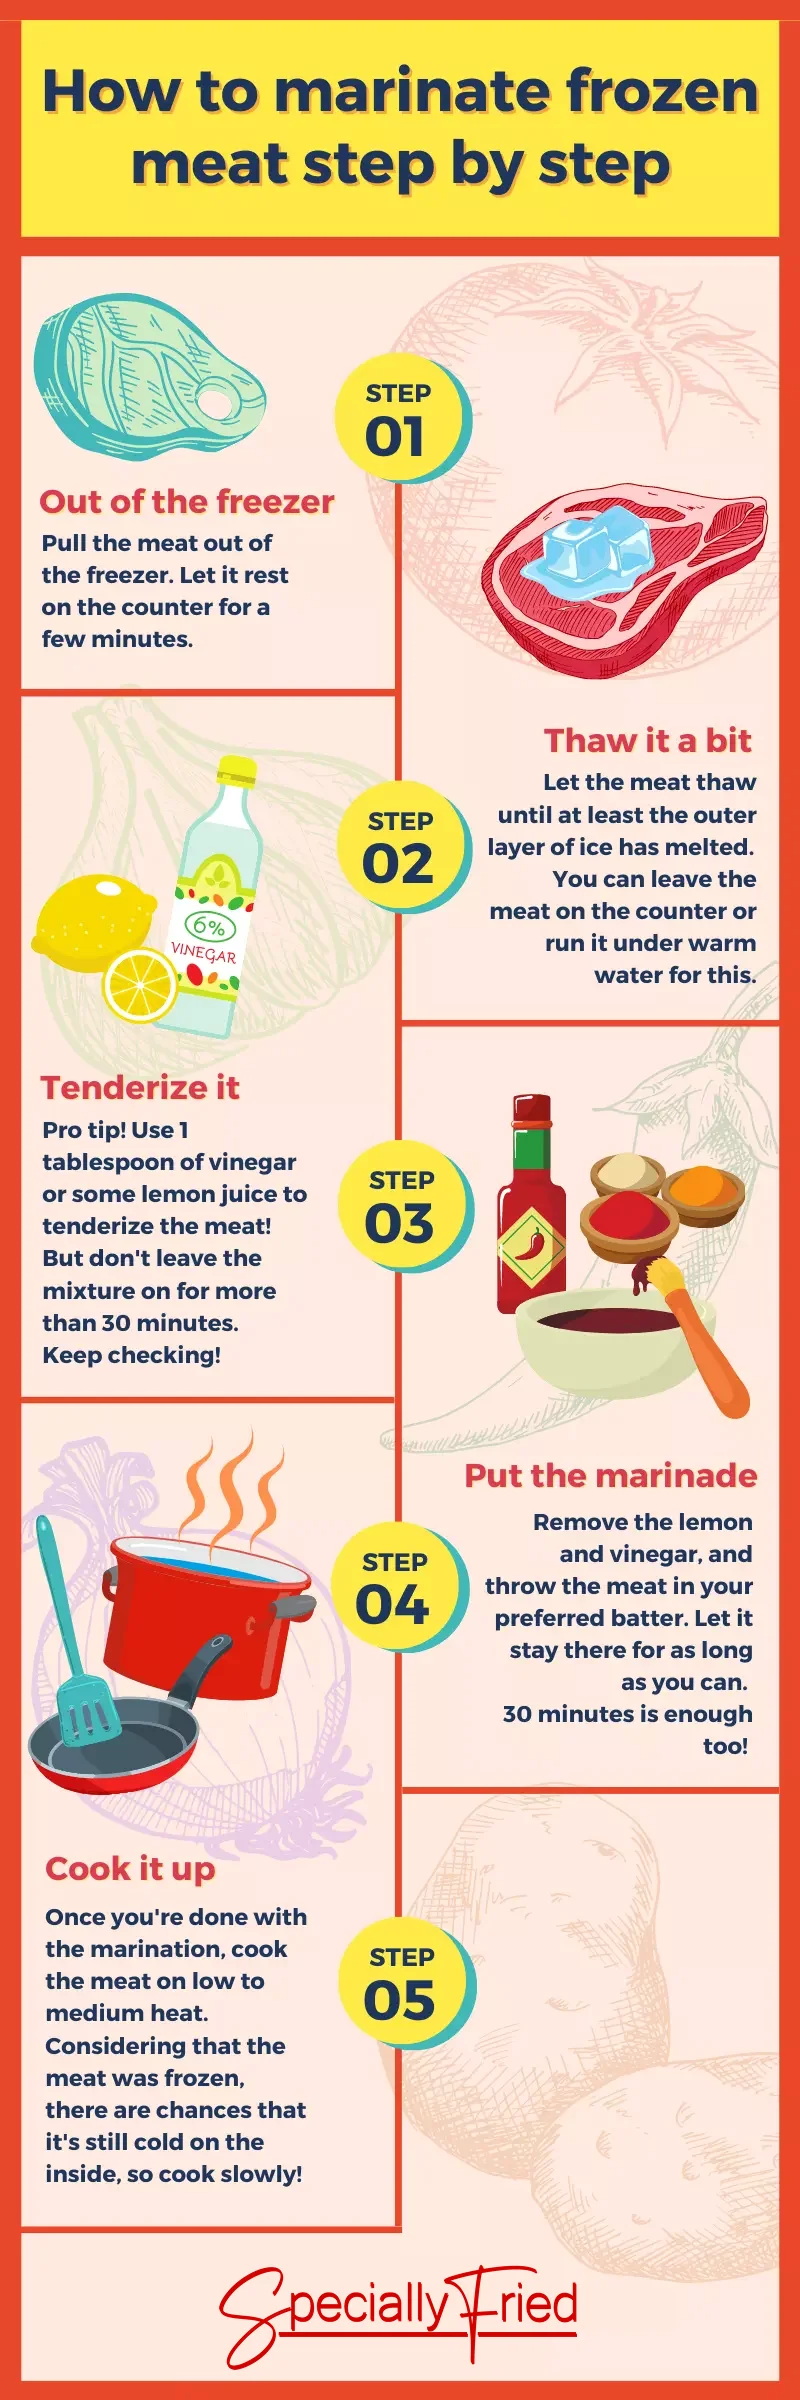 marinate-frozen-meat-infographic